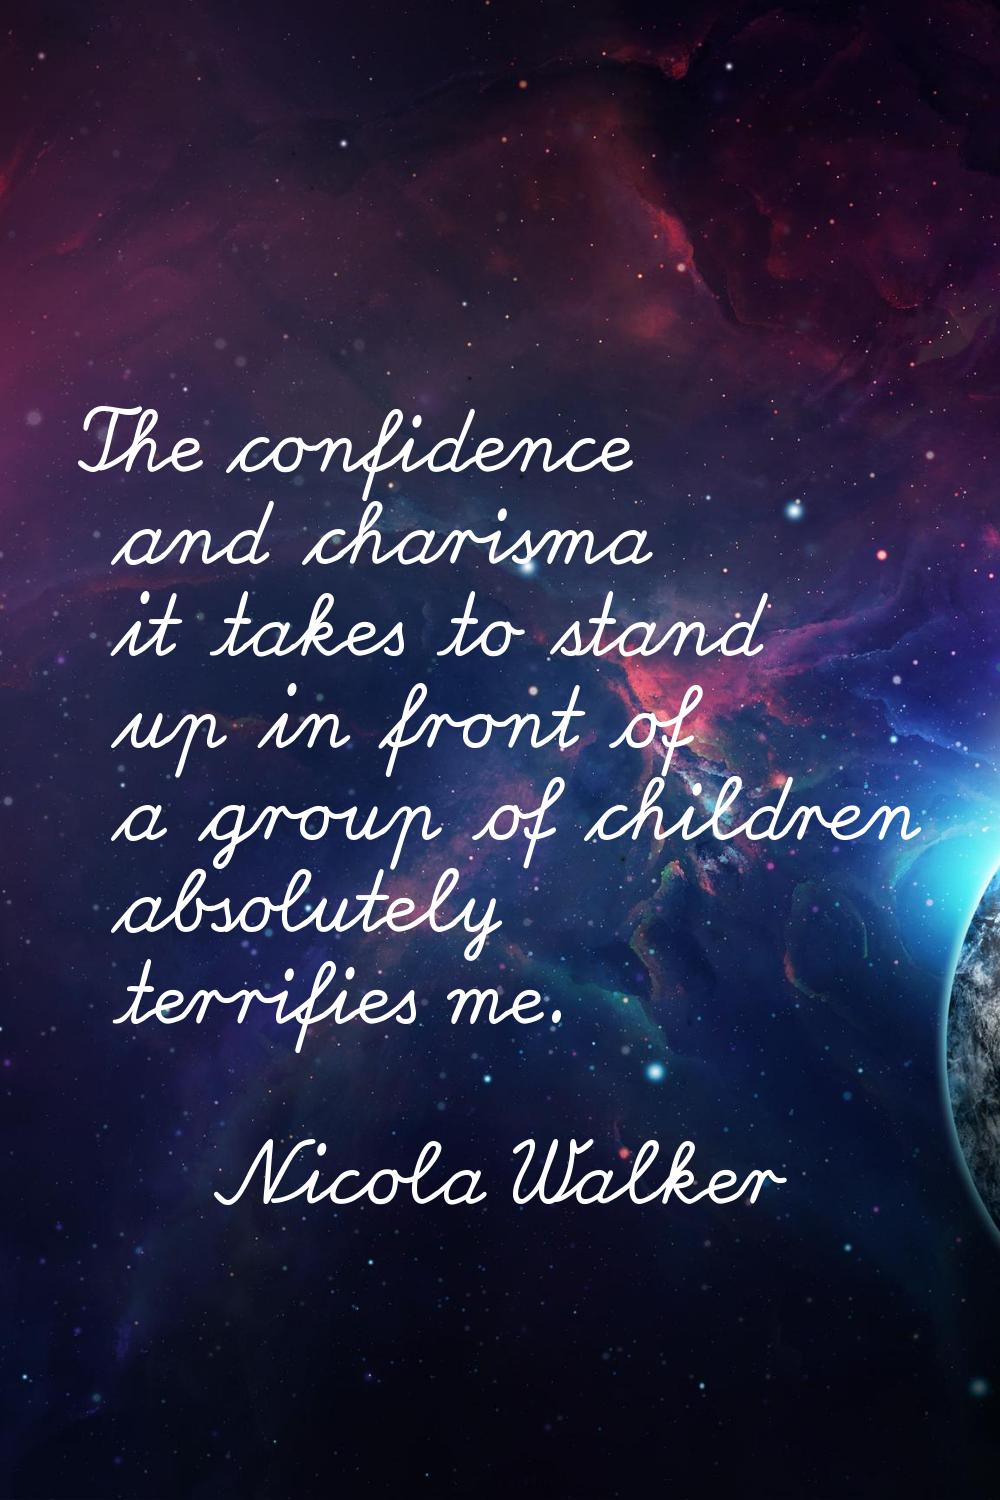 The confidence and charisma it takes to stand up in front of a group of children absolutely terrifi